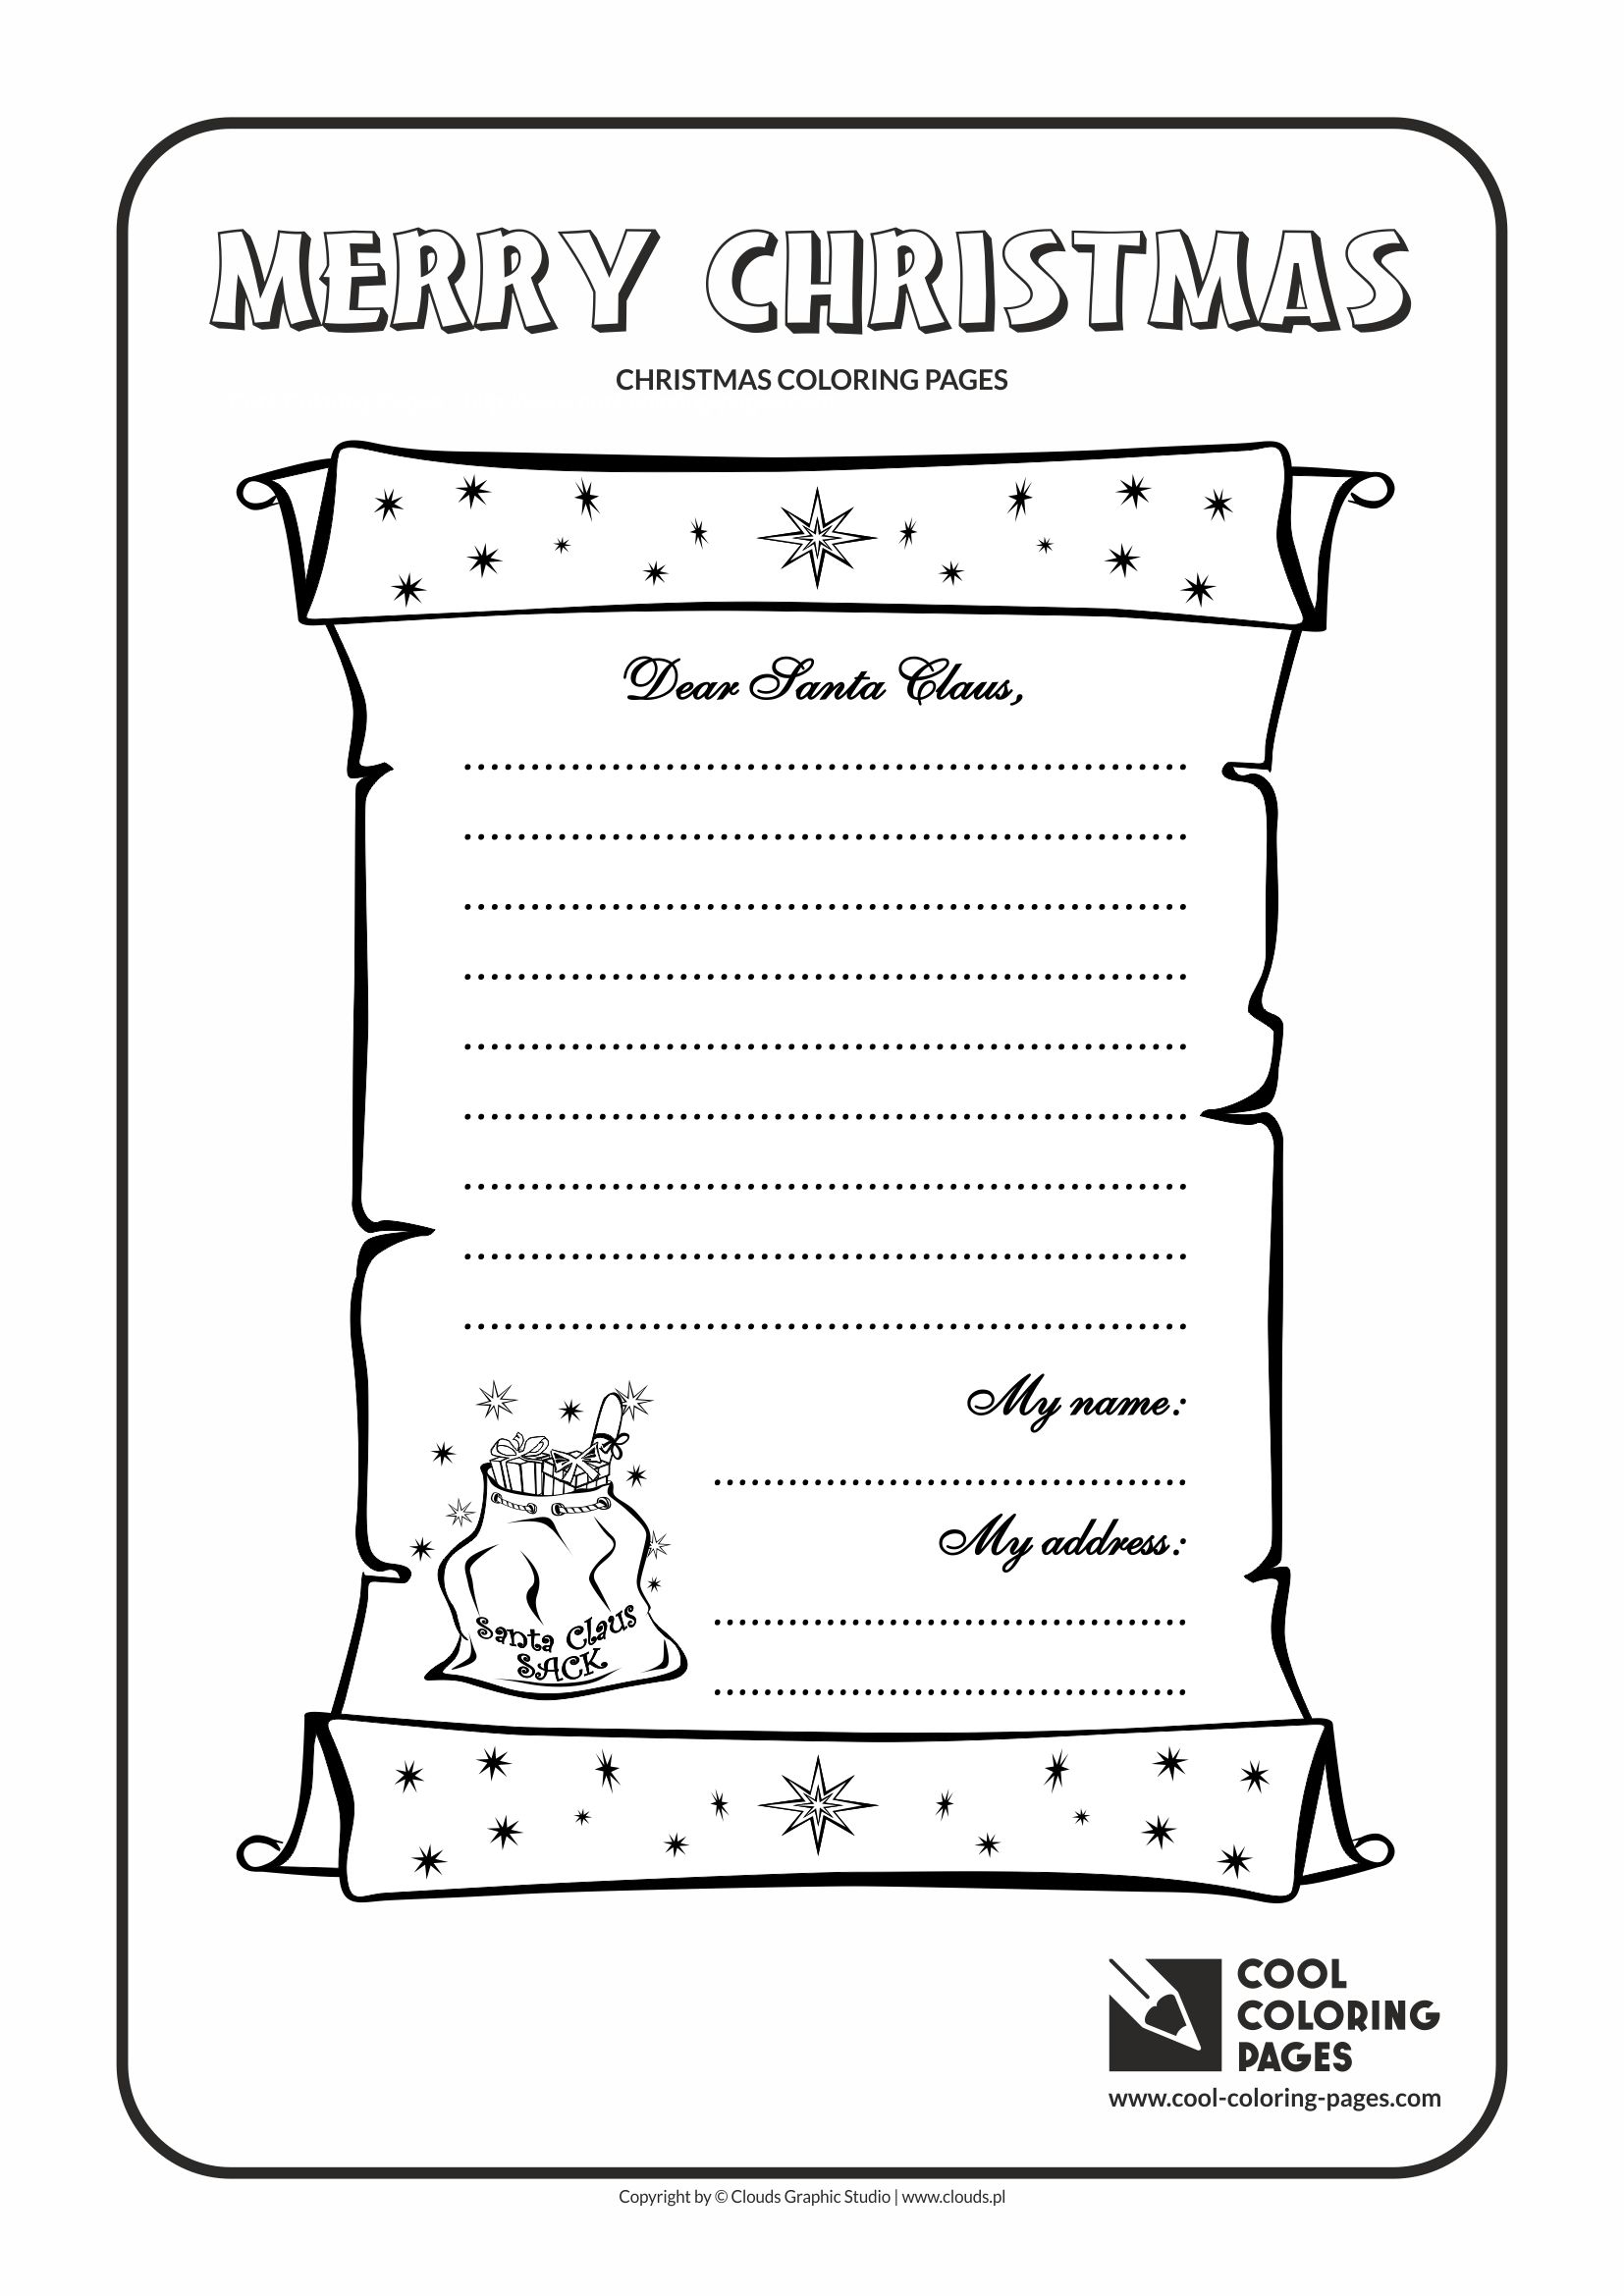 Cool coloring pages christmas coloring pages